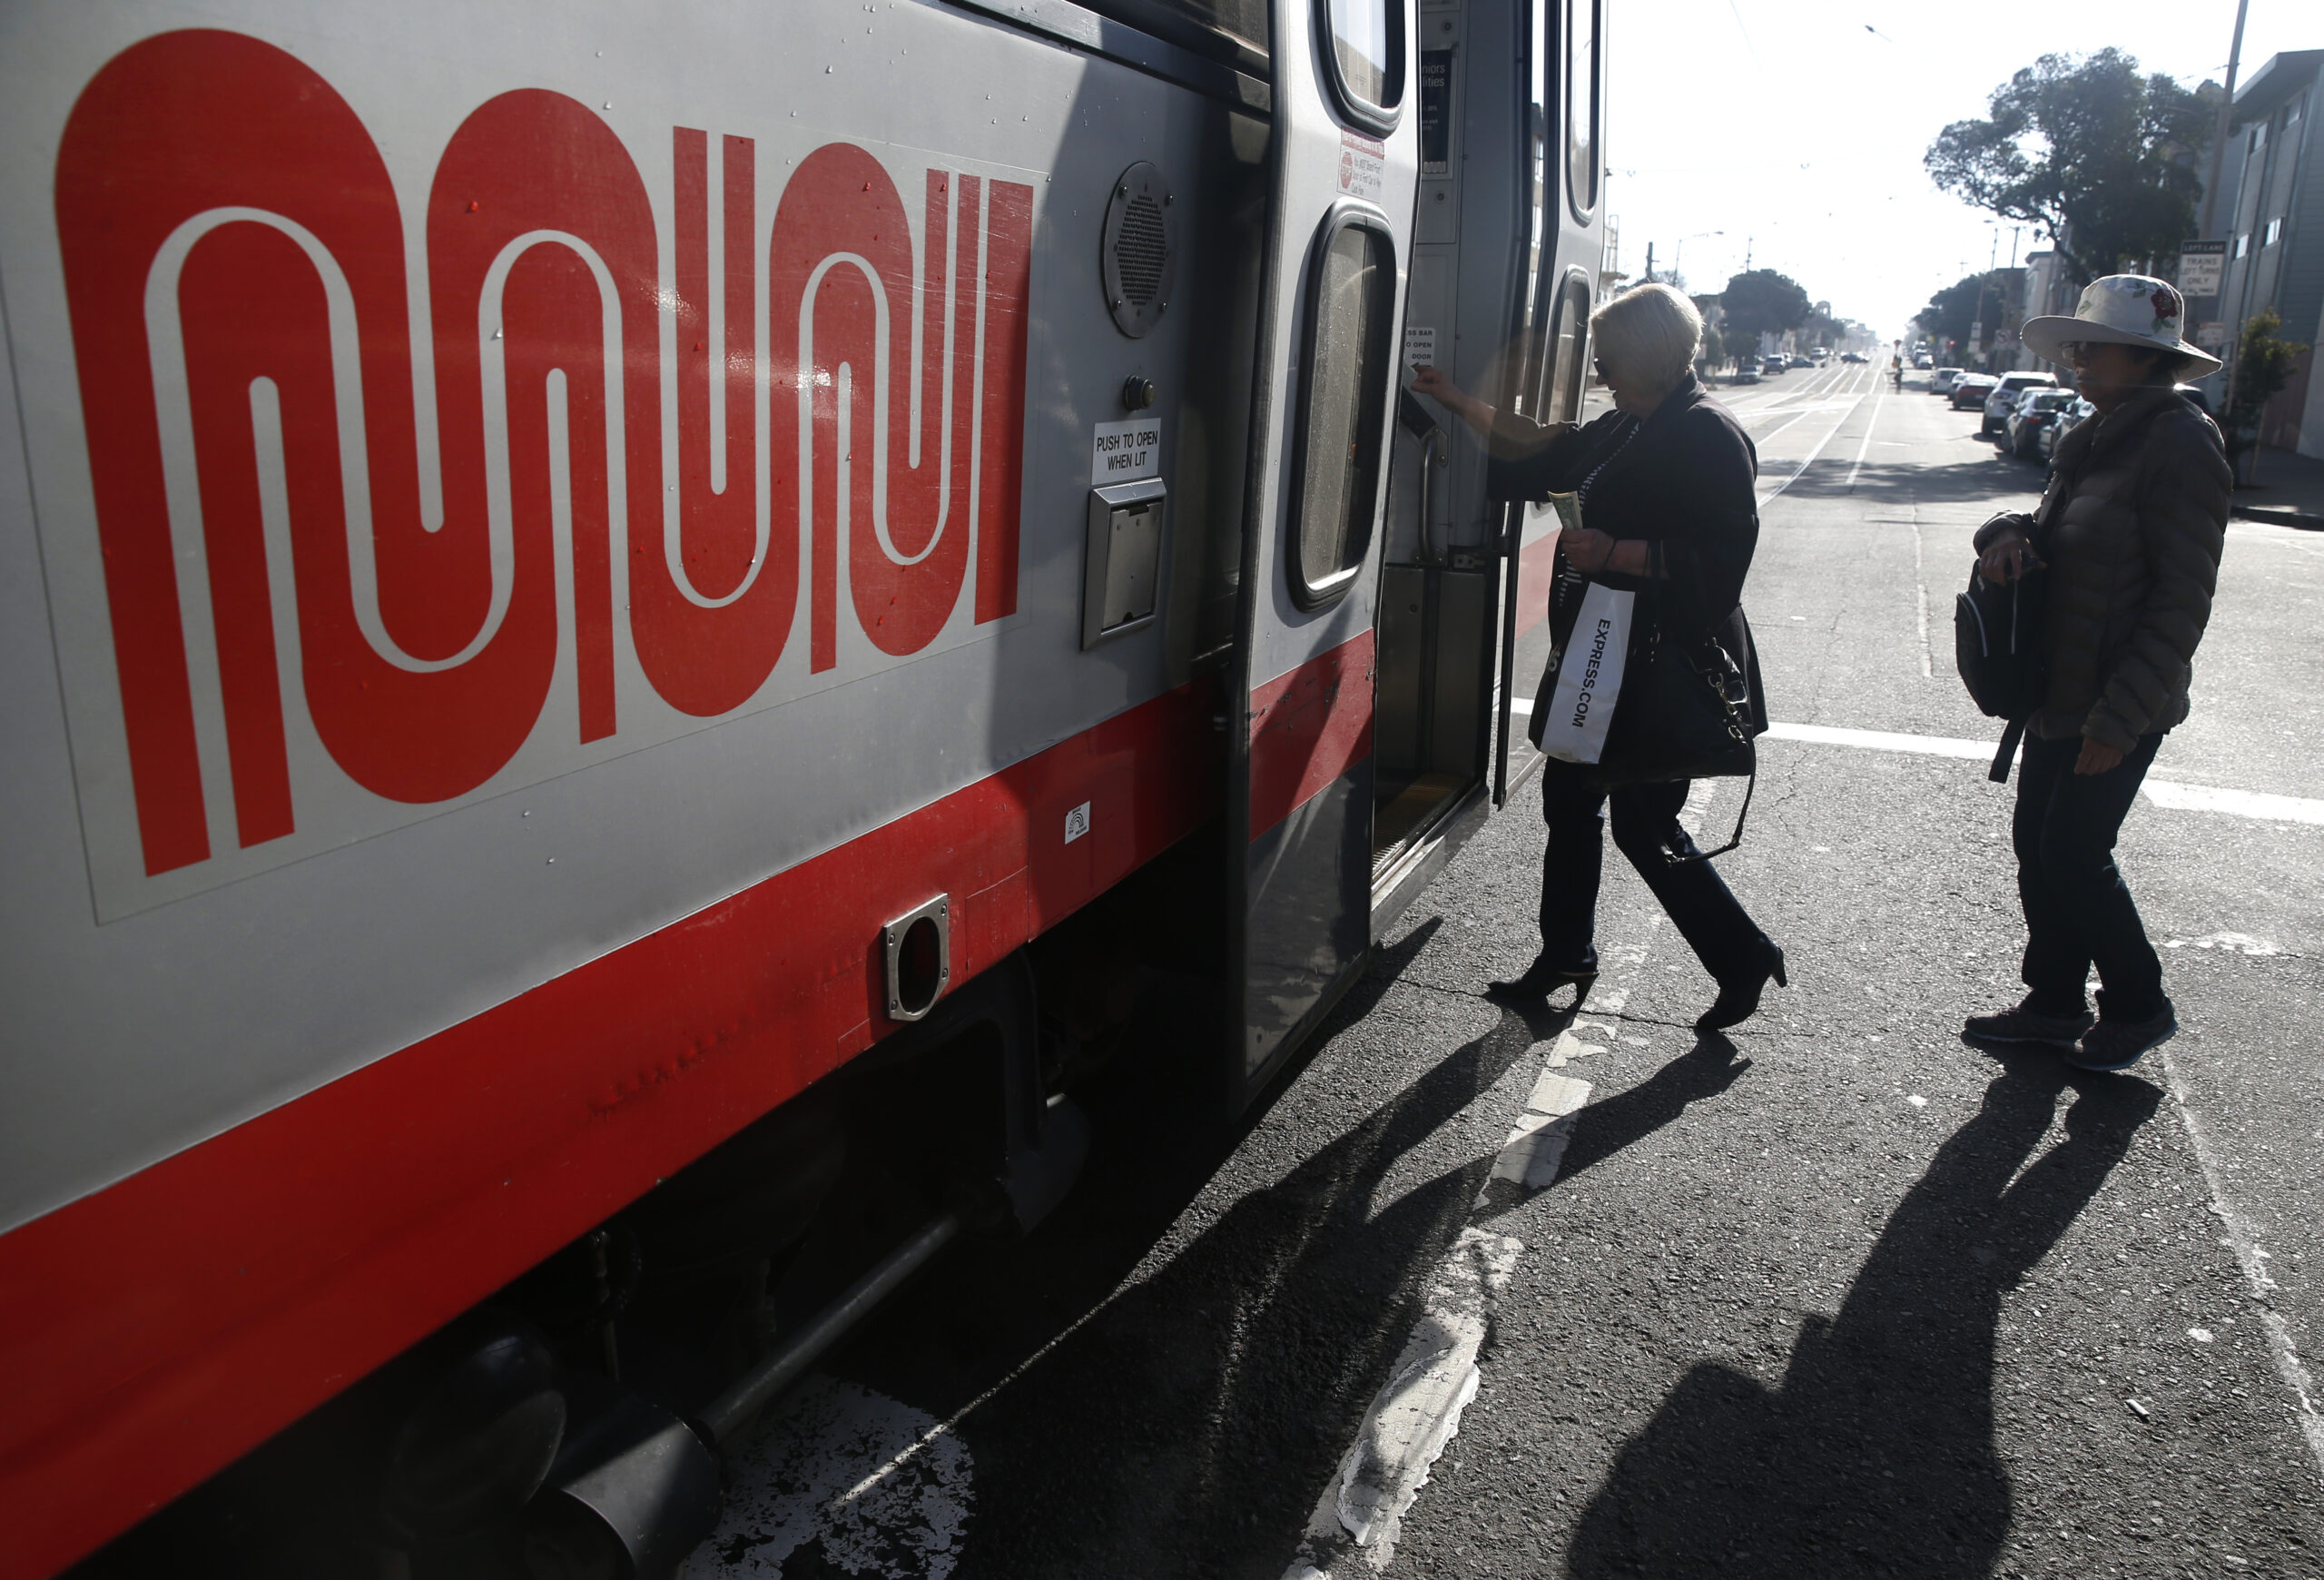 Passengers board an inbound N-Judah streetcar at 48th Avenue in San Francisco, Calif. on Thursday, Aug. 27, 2015. Muni is getting ready to roll out a second round of major service improvements systemwide. | Paul Chinn/The San Francisco Chronicle via Getty Images